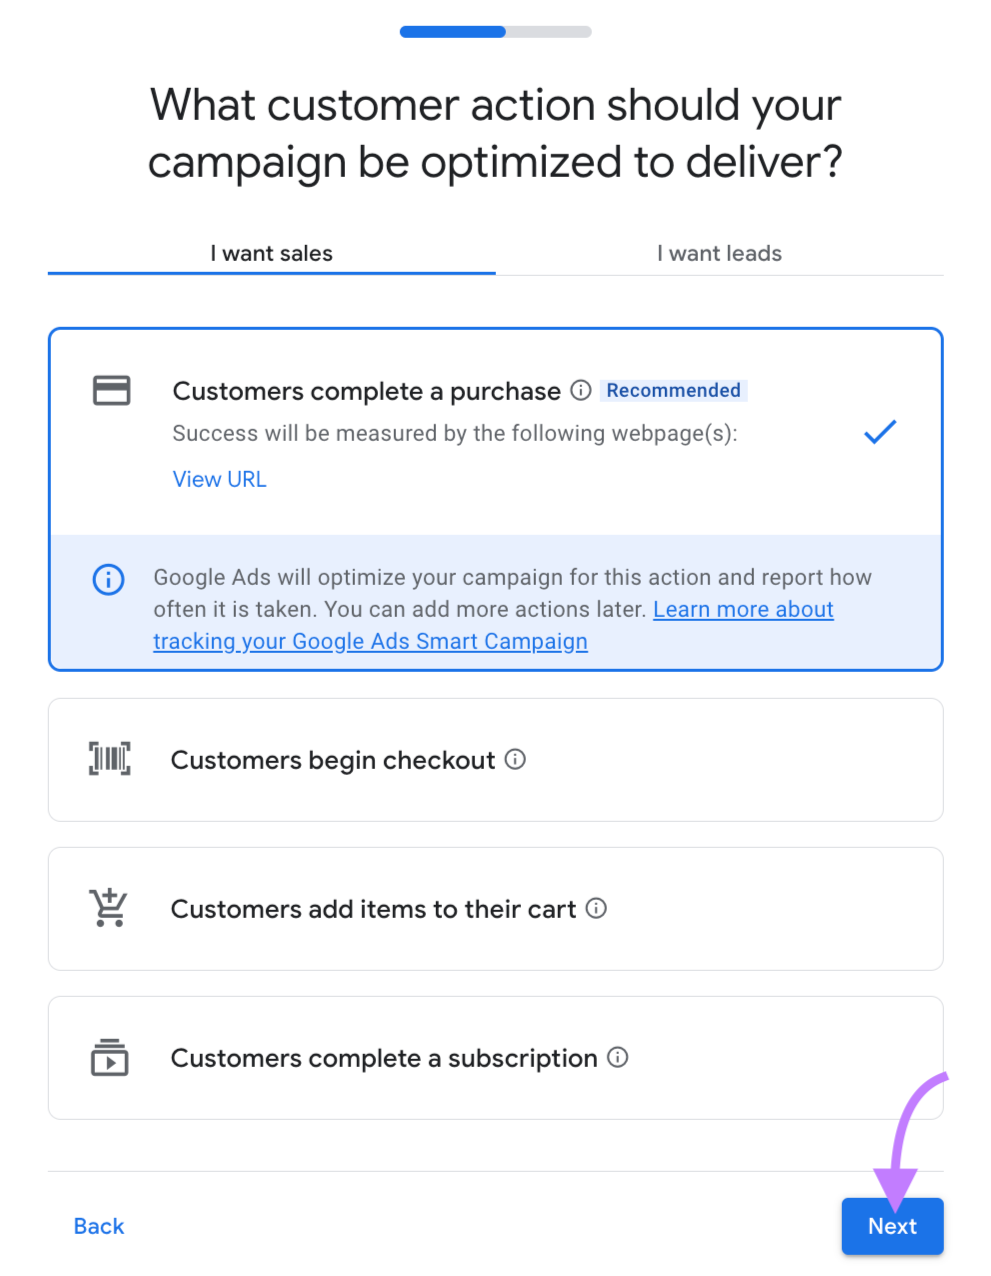 "What customer action should your campaign be optimized to deliver?" screen